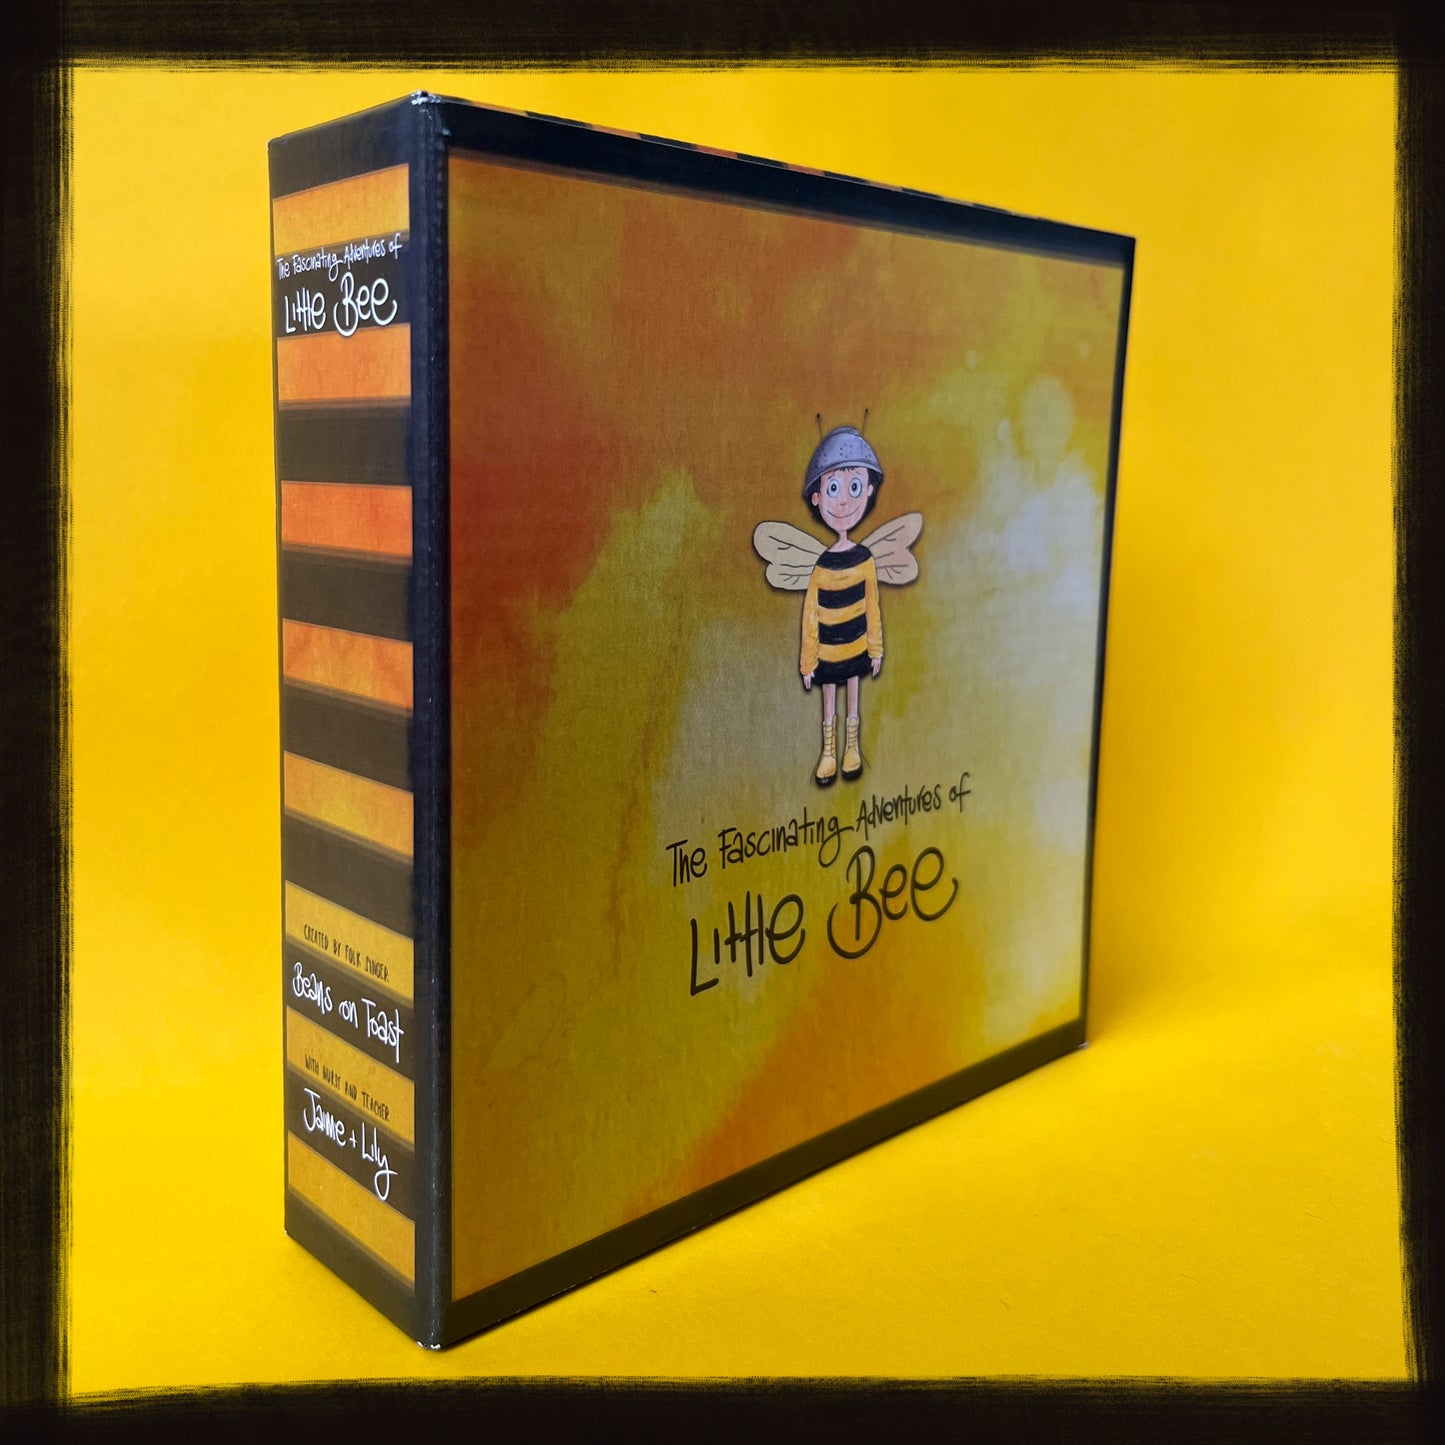 The Fascinating Adventures of Little Bee - Box Set